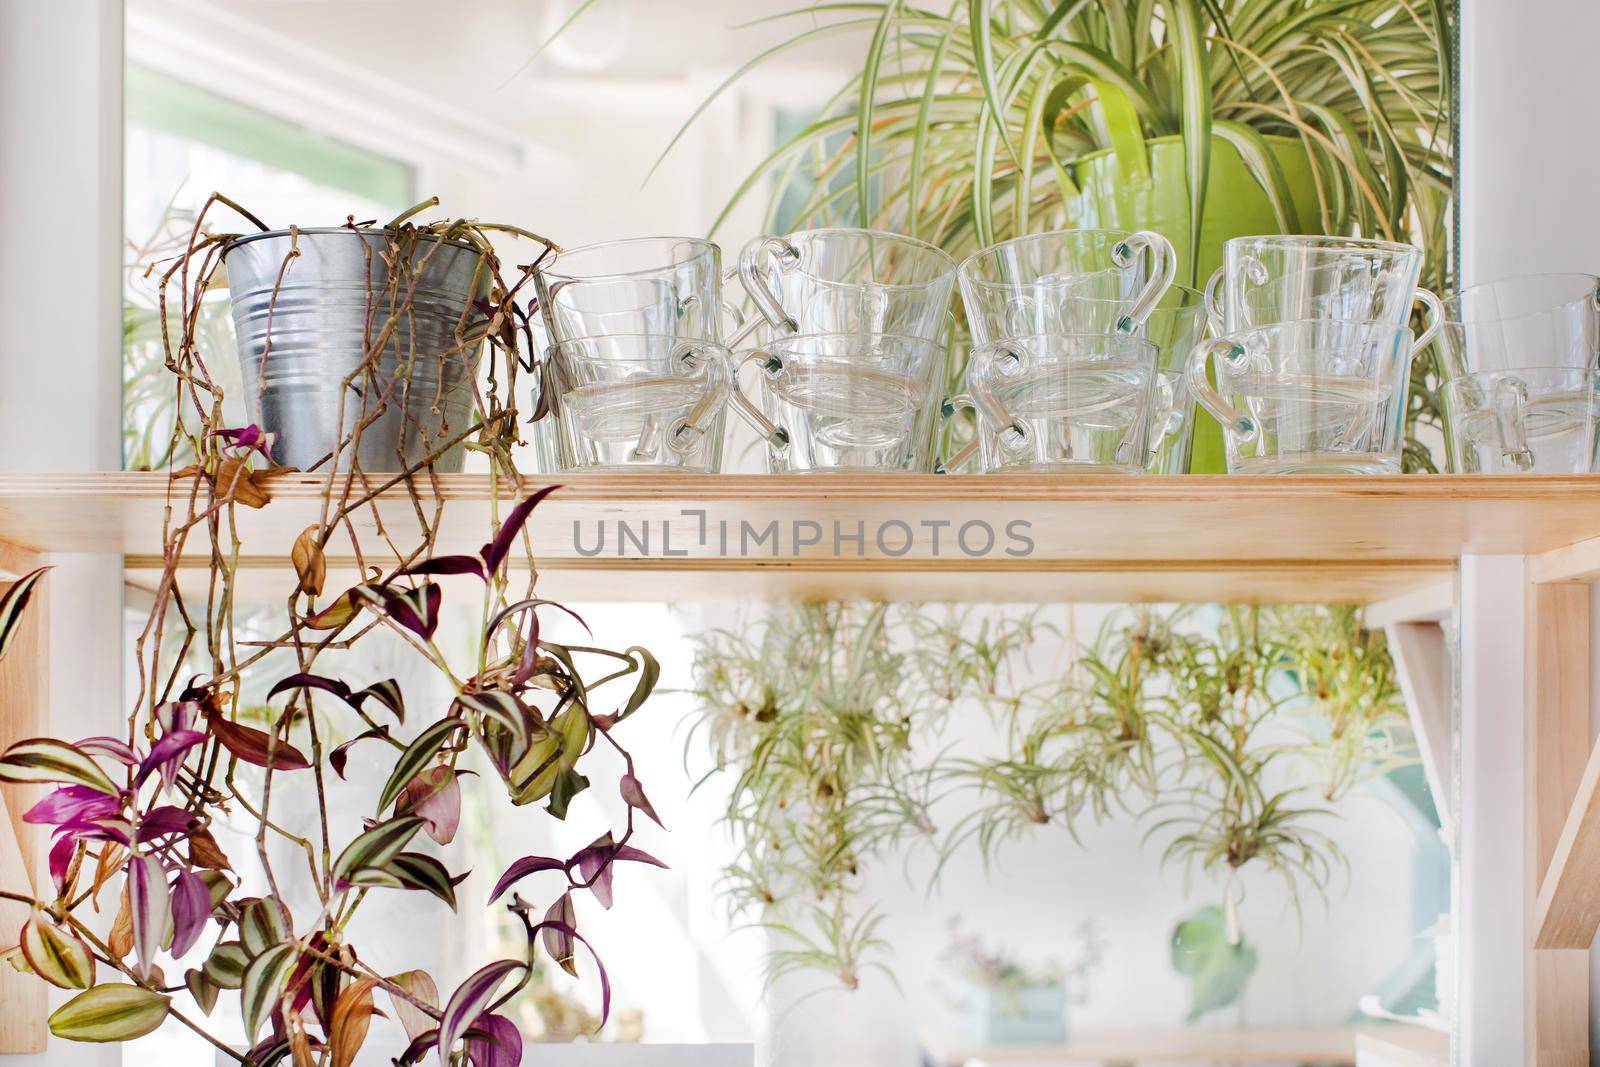 Crop view of glass mugs and house plants standing on shelf in bright room